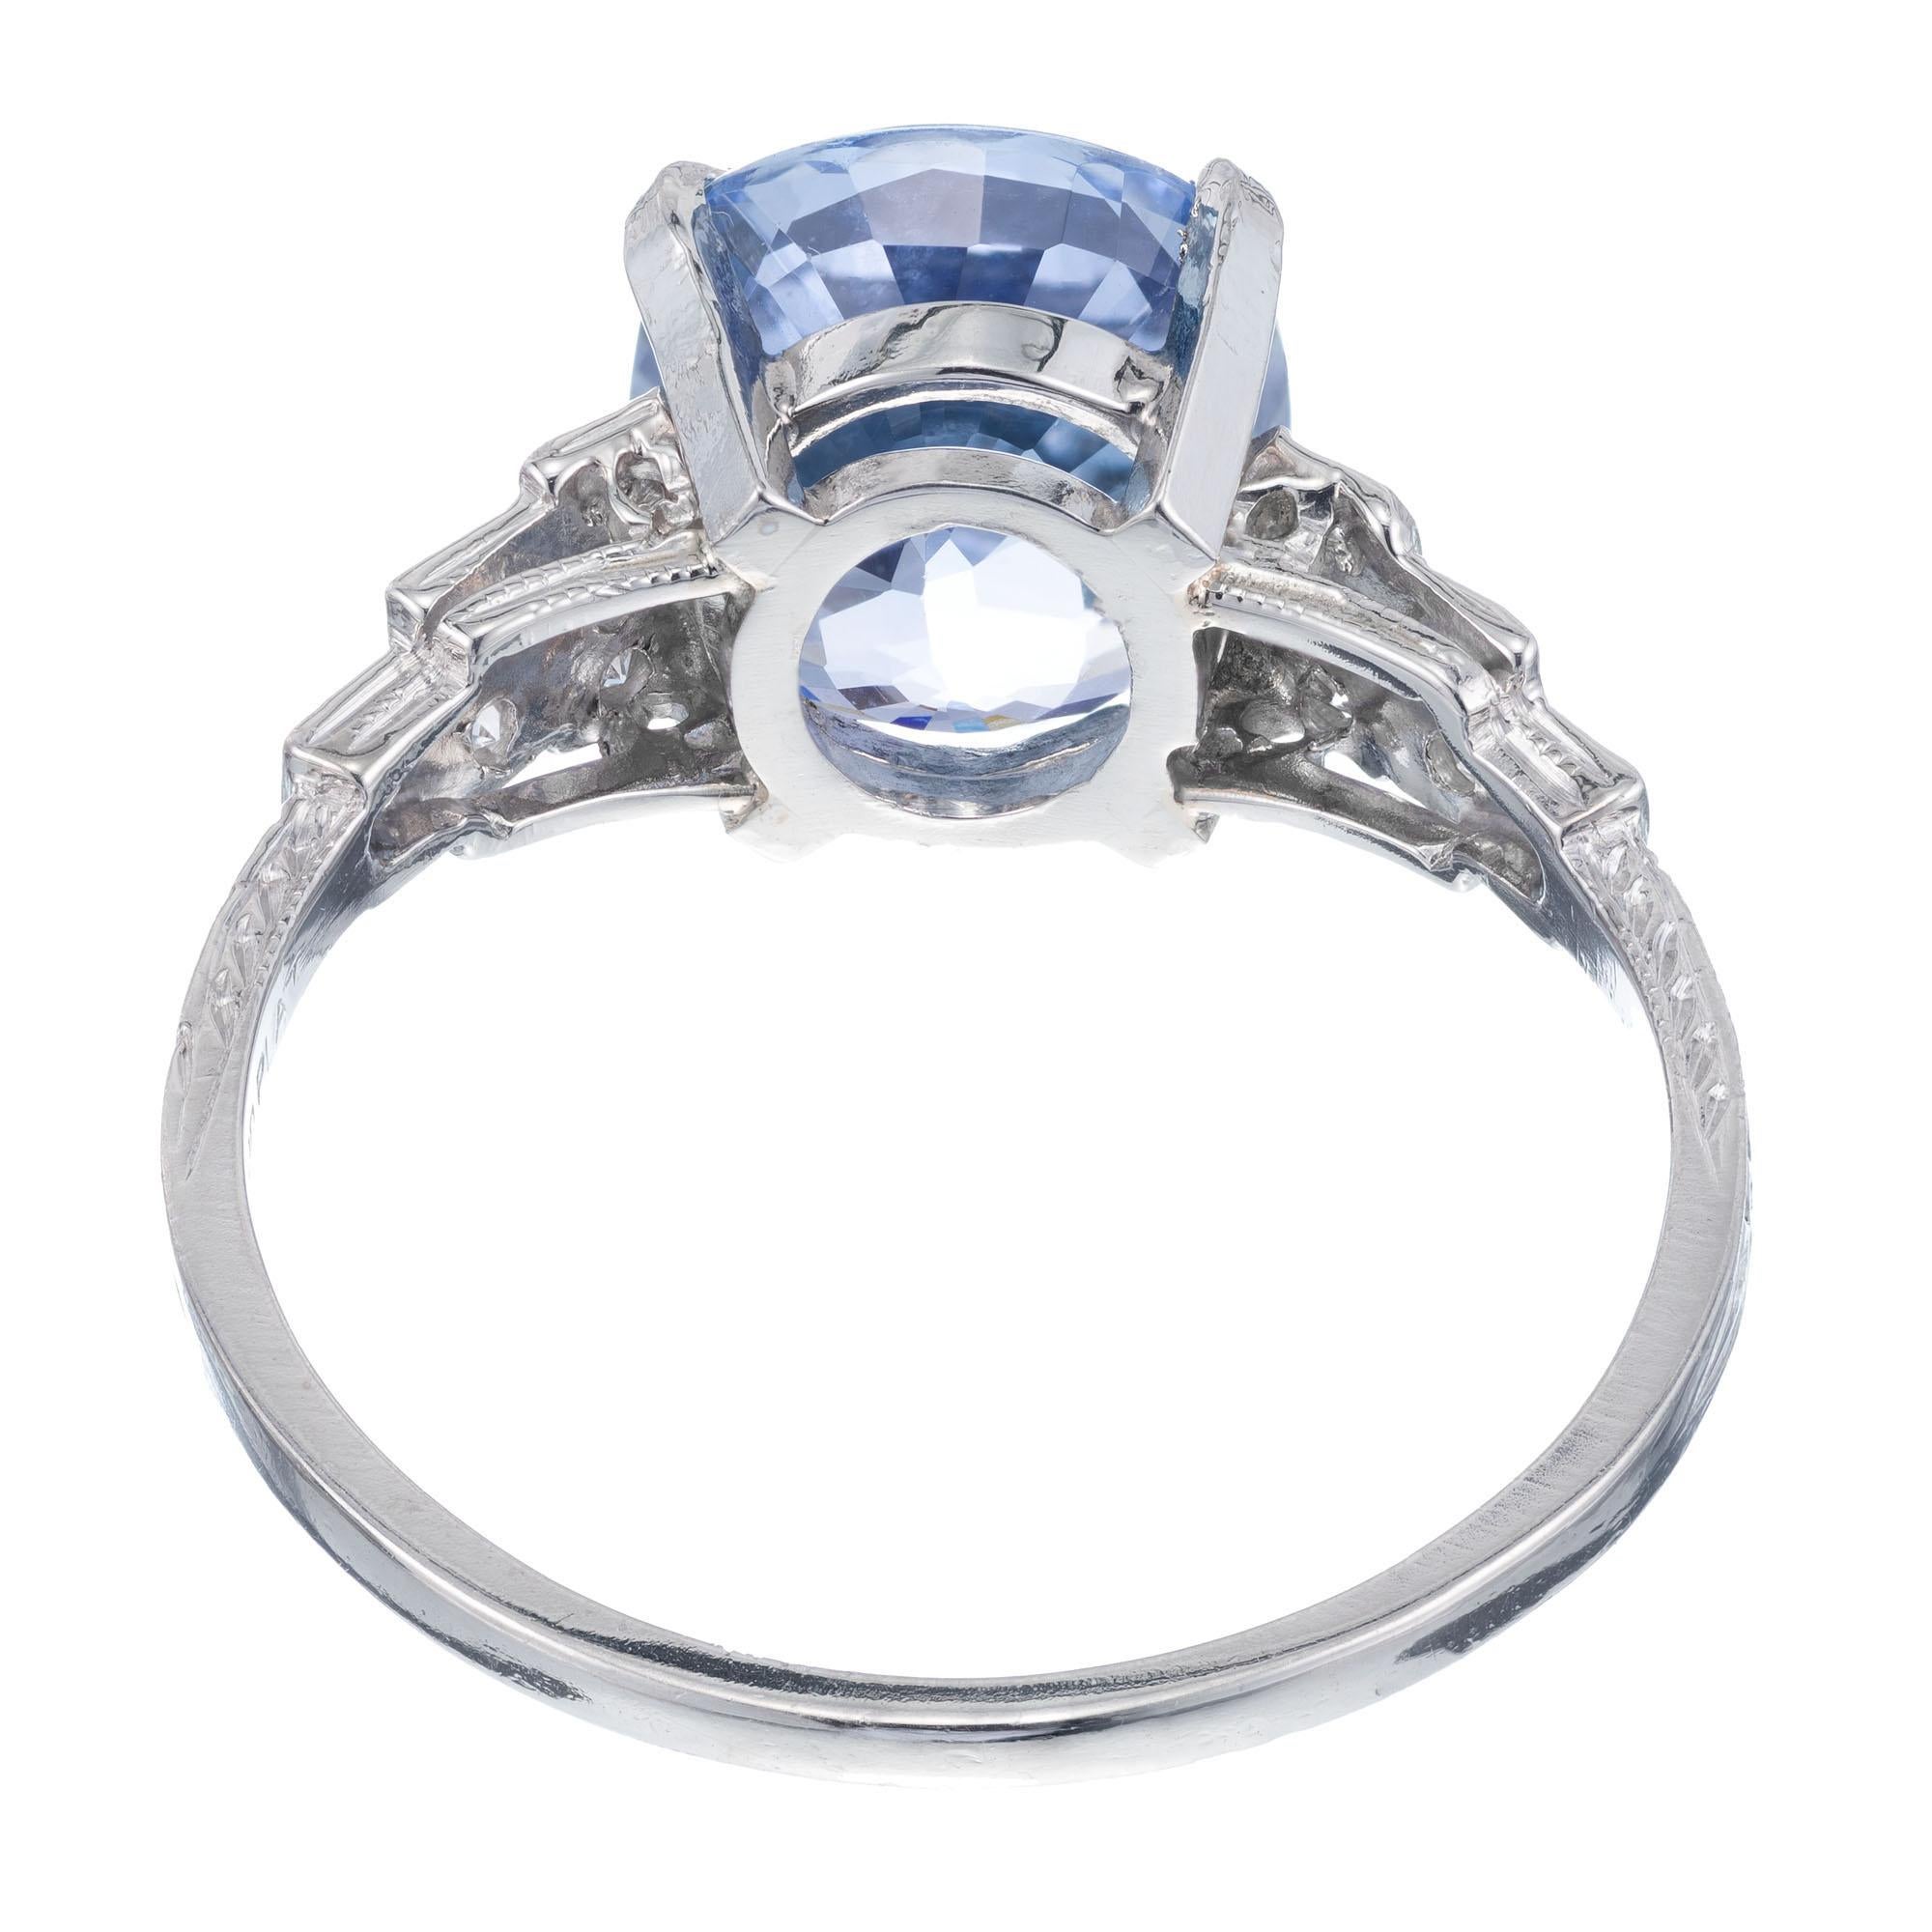 GIA Certified Art Deco 4.51 Carat Sapphire Diamond Platinum Engagement Ring In Excellent Condition For Sale In Stamford, CT